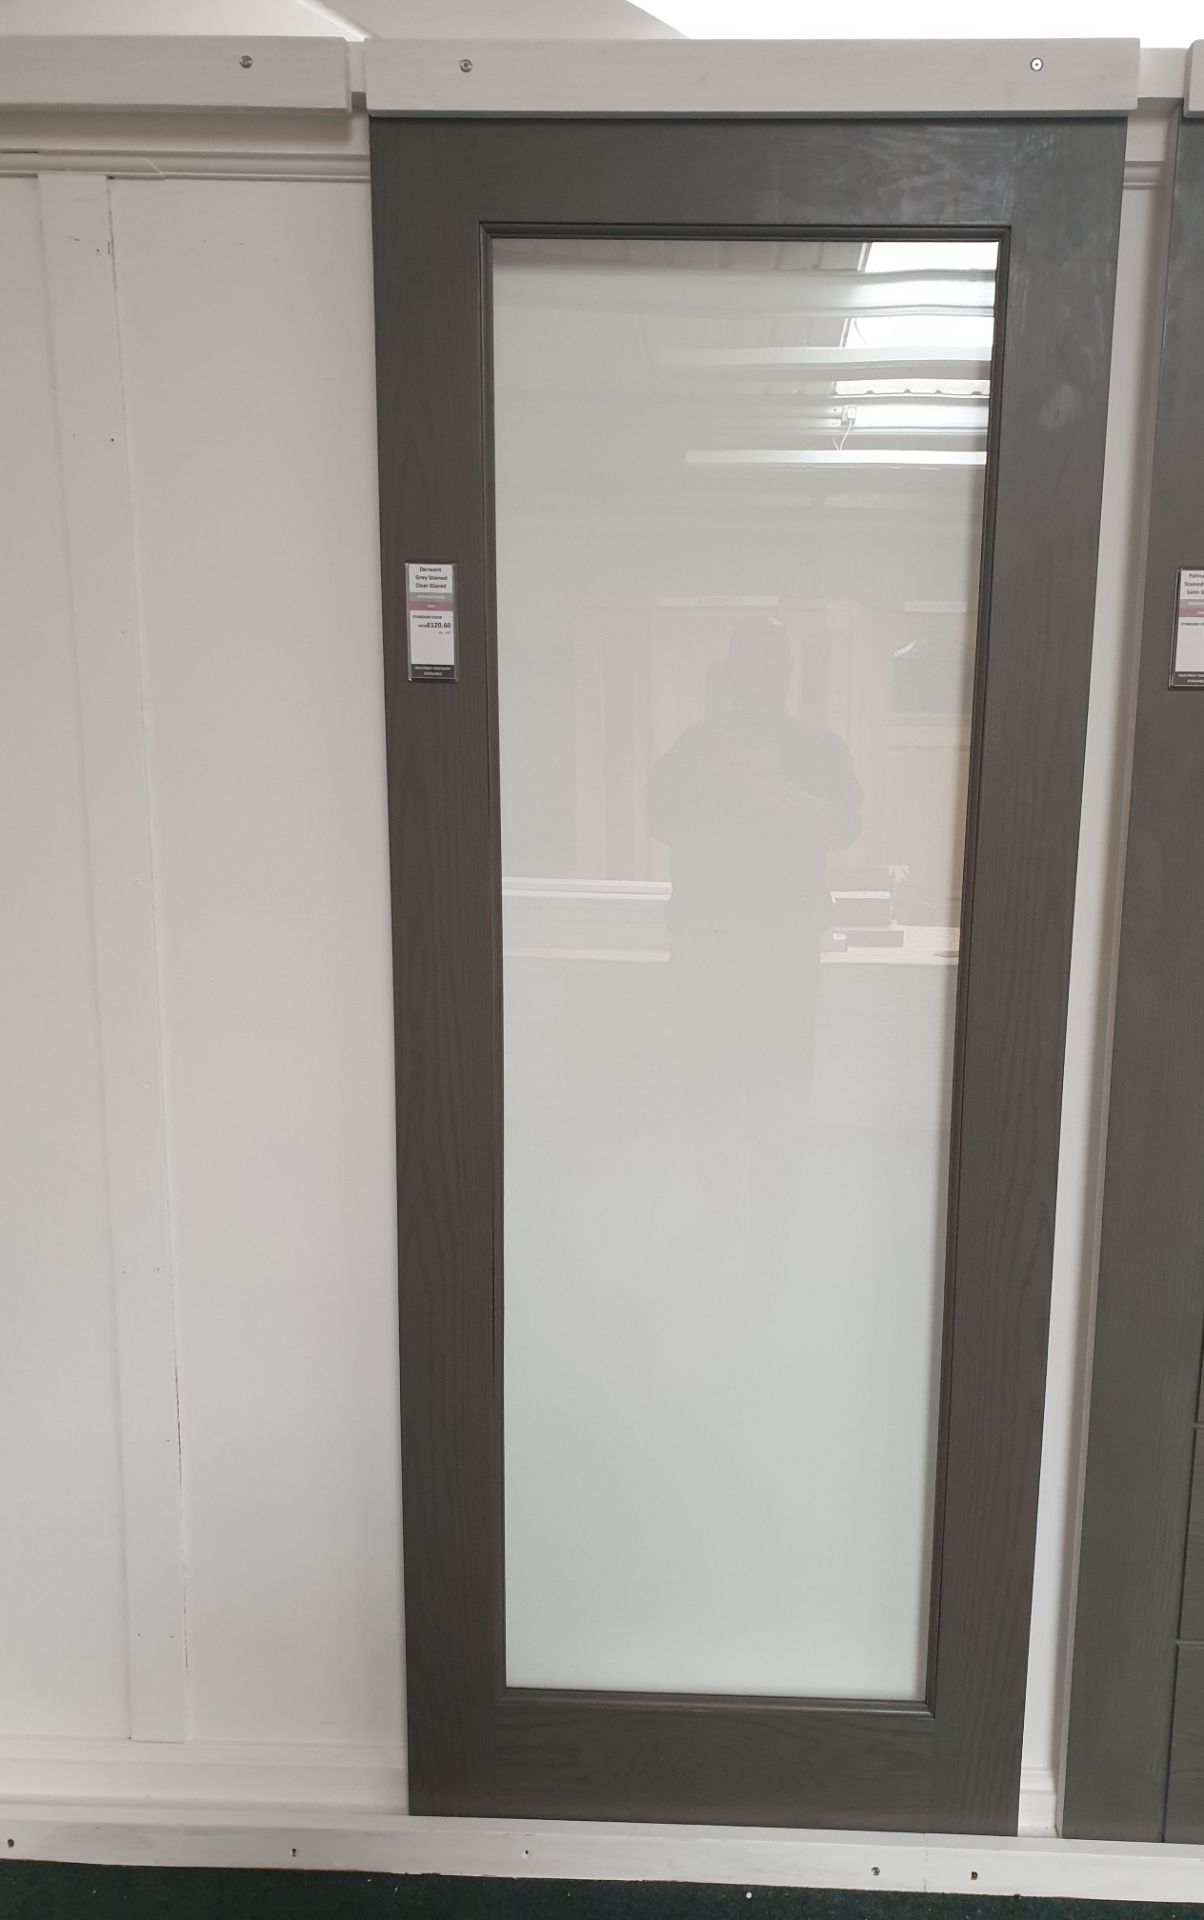 13 x Derwent Clear Glazed Grey UP 005 Internal Door 1981x762x35mm - Lots to be handed out in order